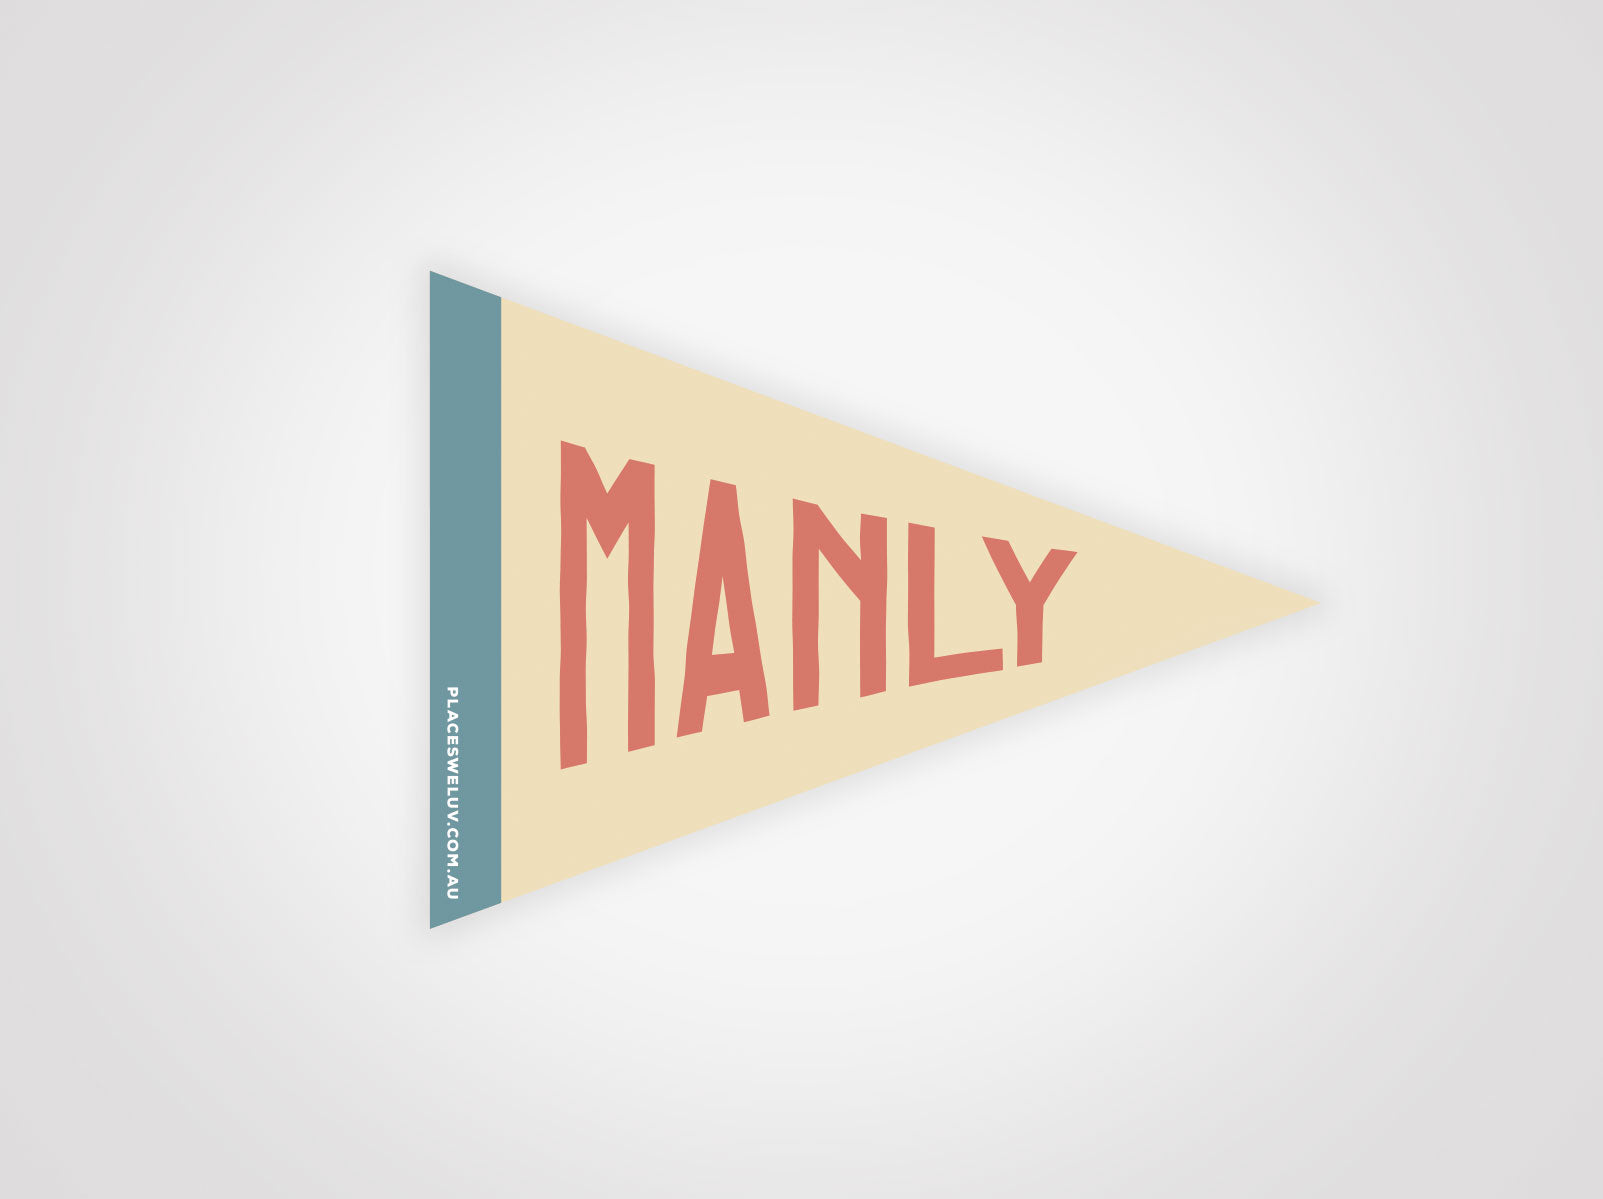 Manly vintage travel style Flag decal retro design by place we luv